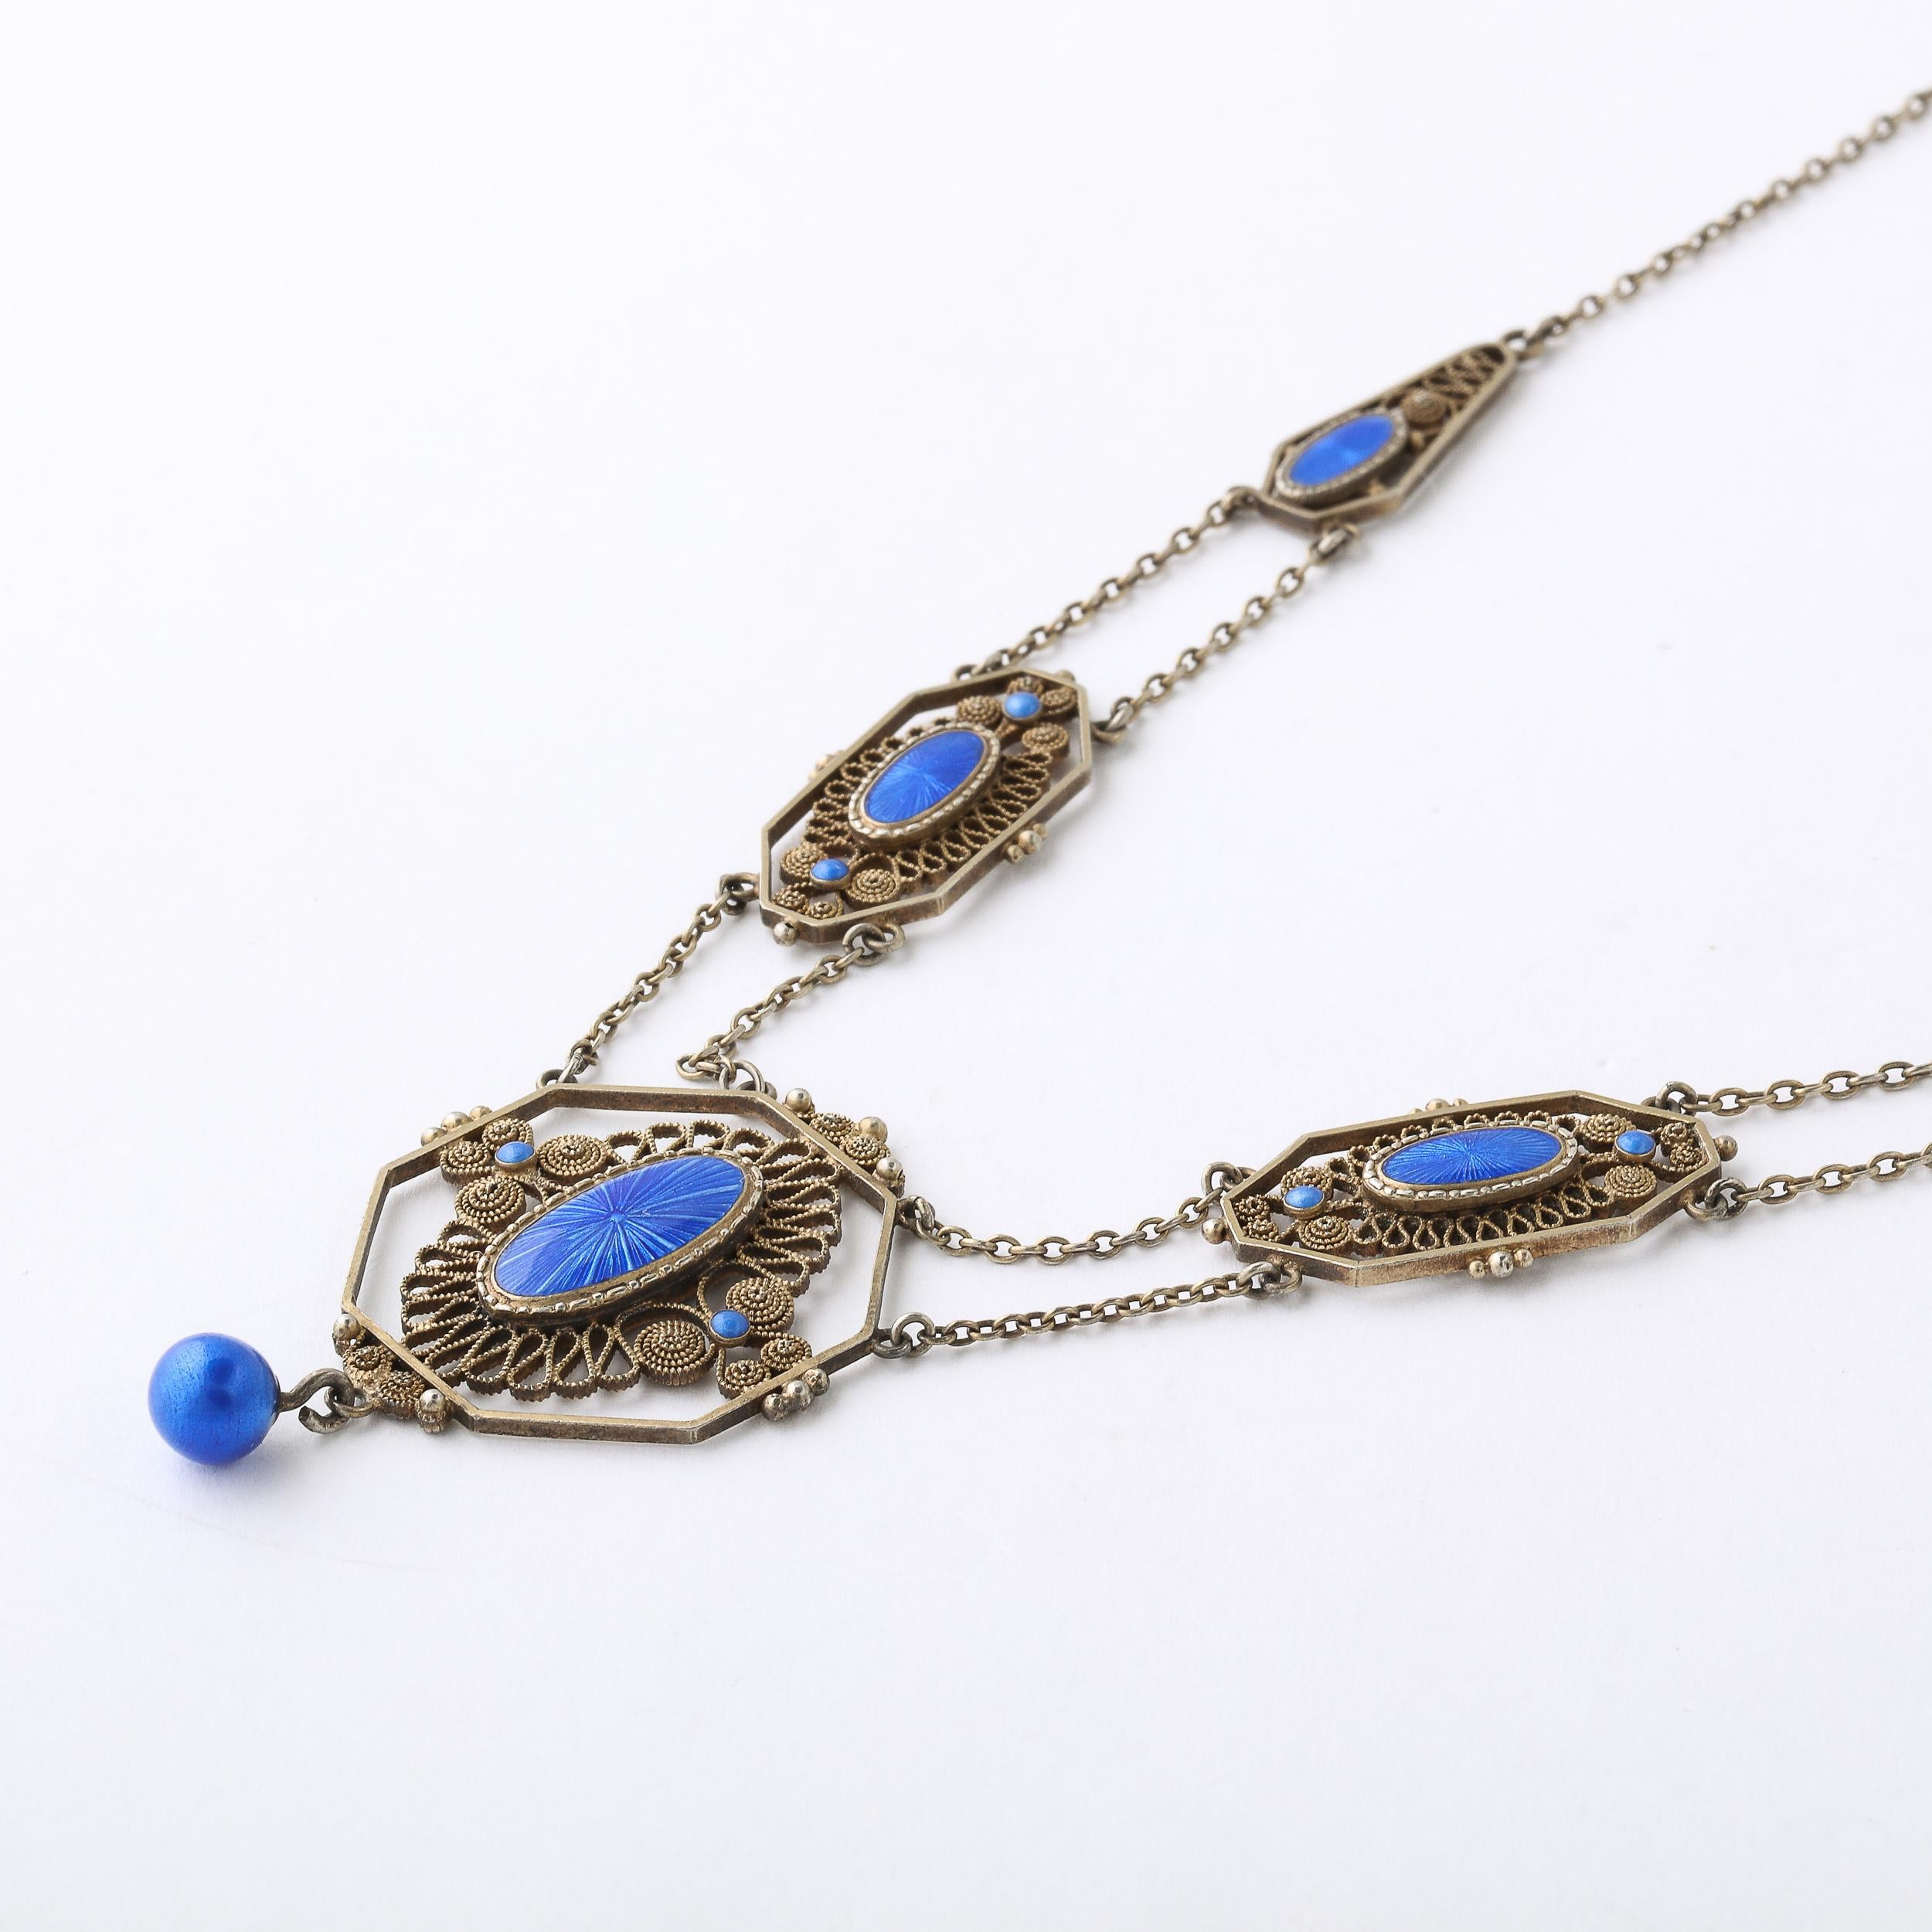 Antique Silver Filigree Swag Style Necklace with Blue Guilloche Enamel Accents 1